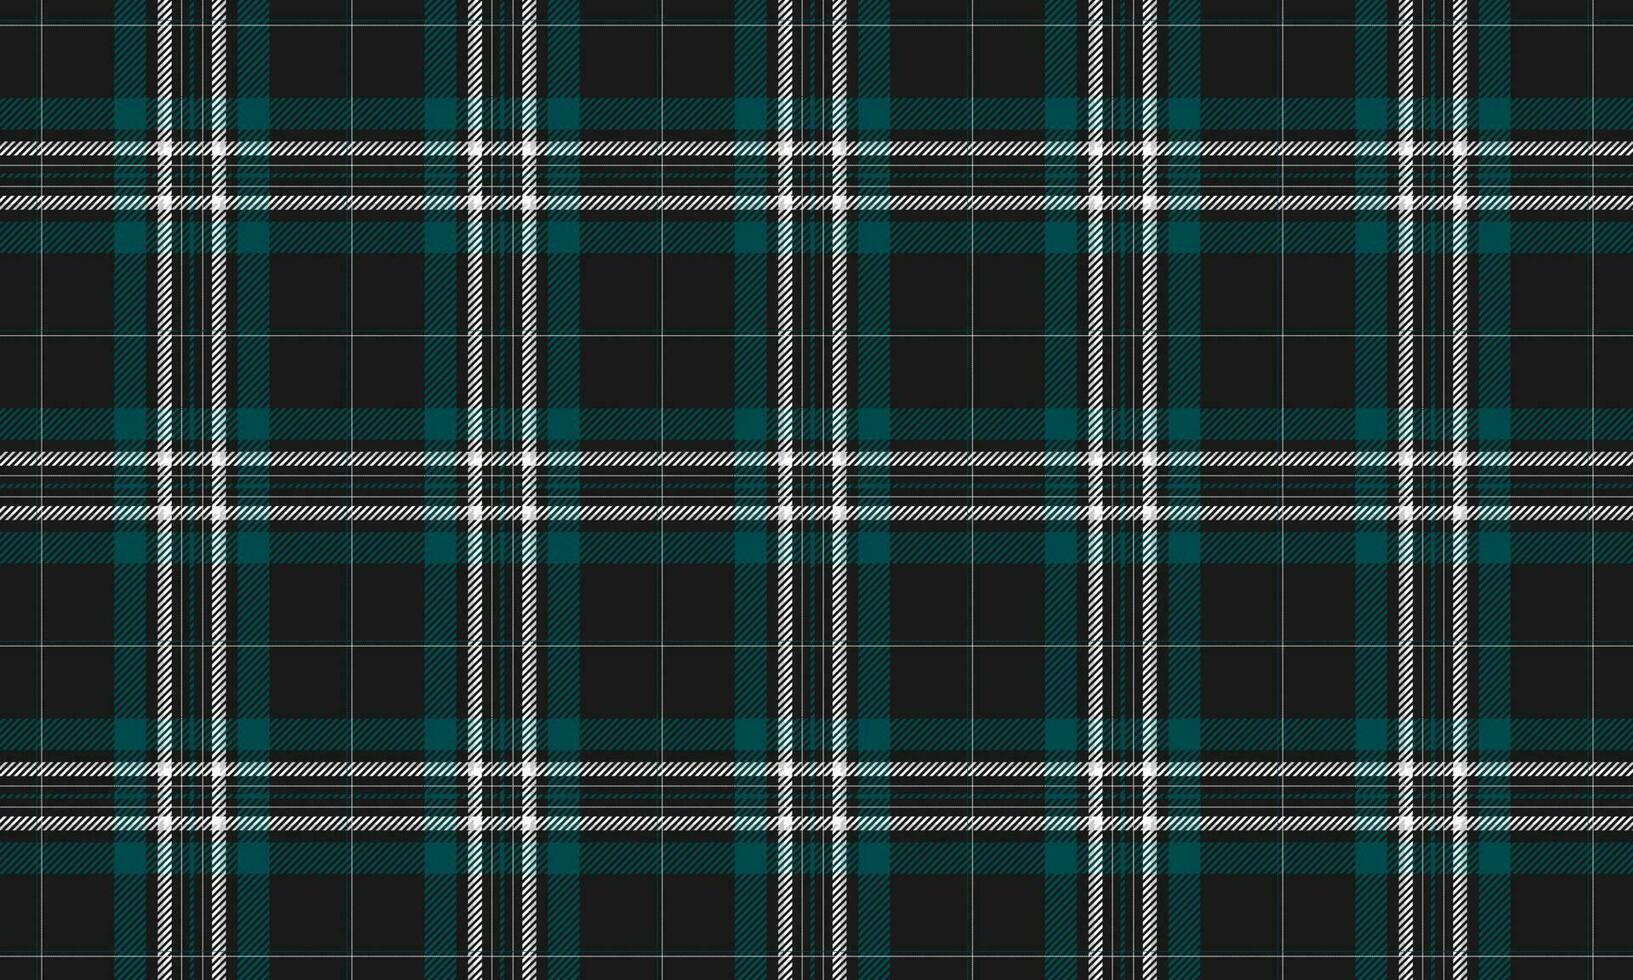 flannel shirt background black, blue, and white tartan plaid seamless pattern.  tartan, plaid, pattern, vector, background, check, square vector